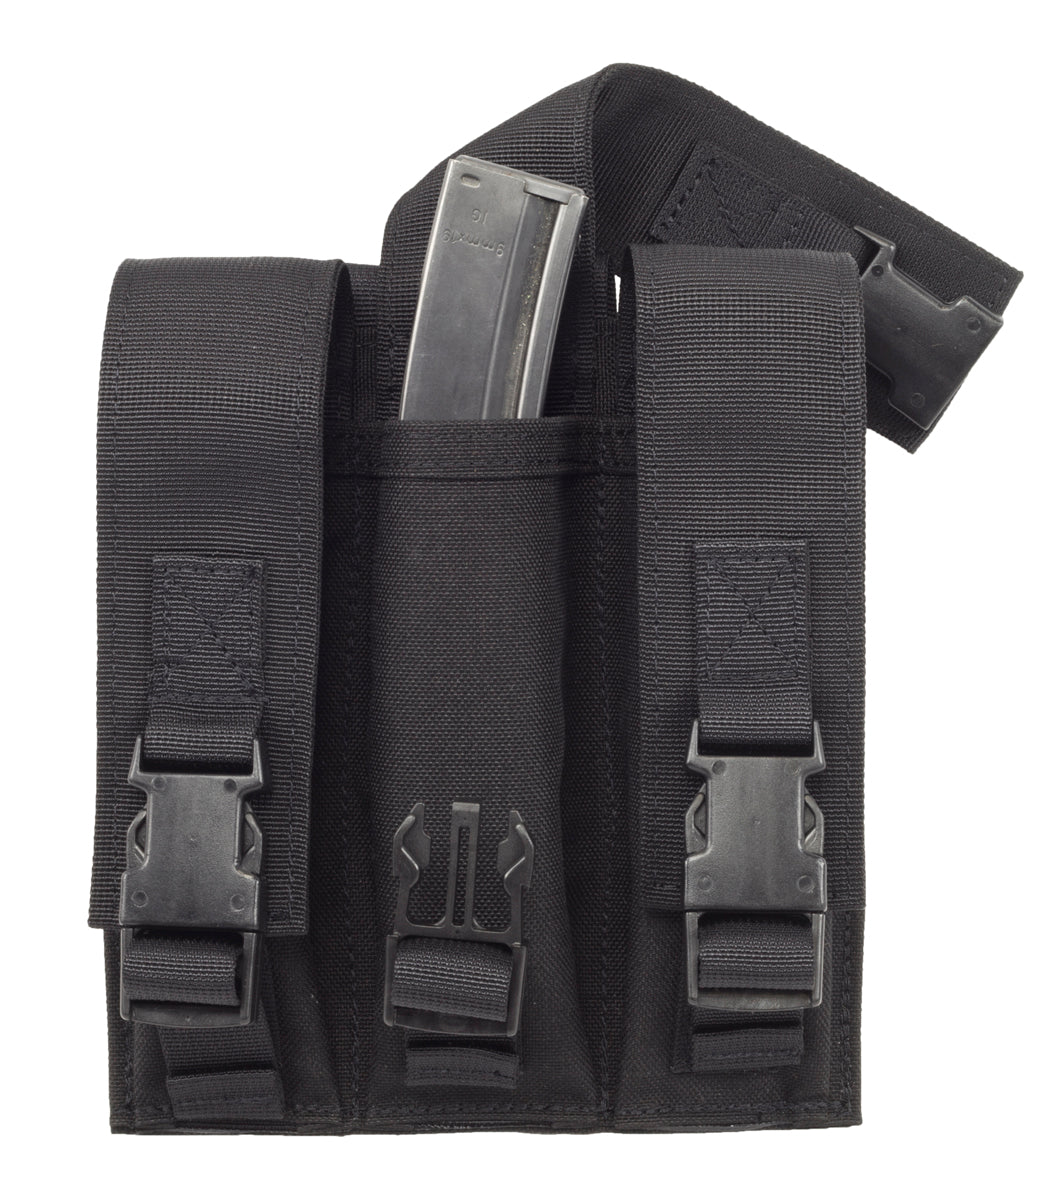 MP5 / 9mm MOLLE Stick Mag Pouch, Triple